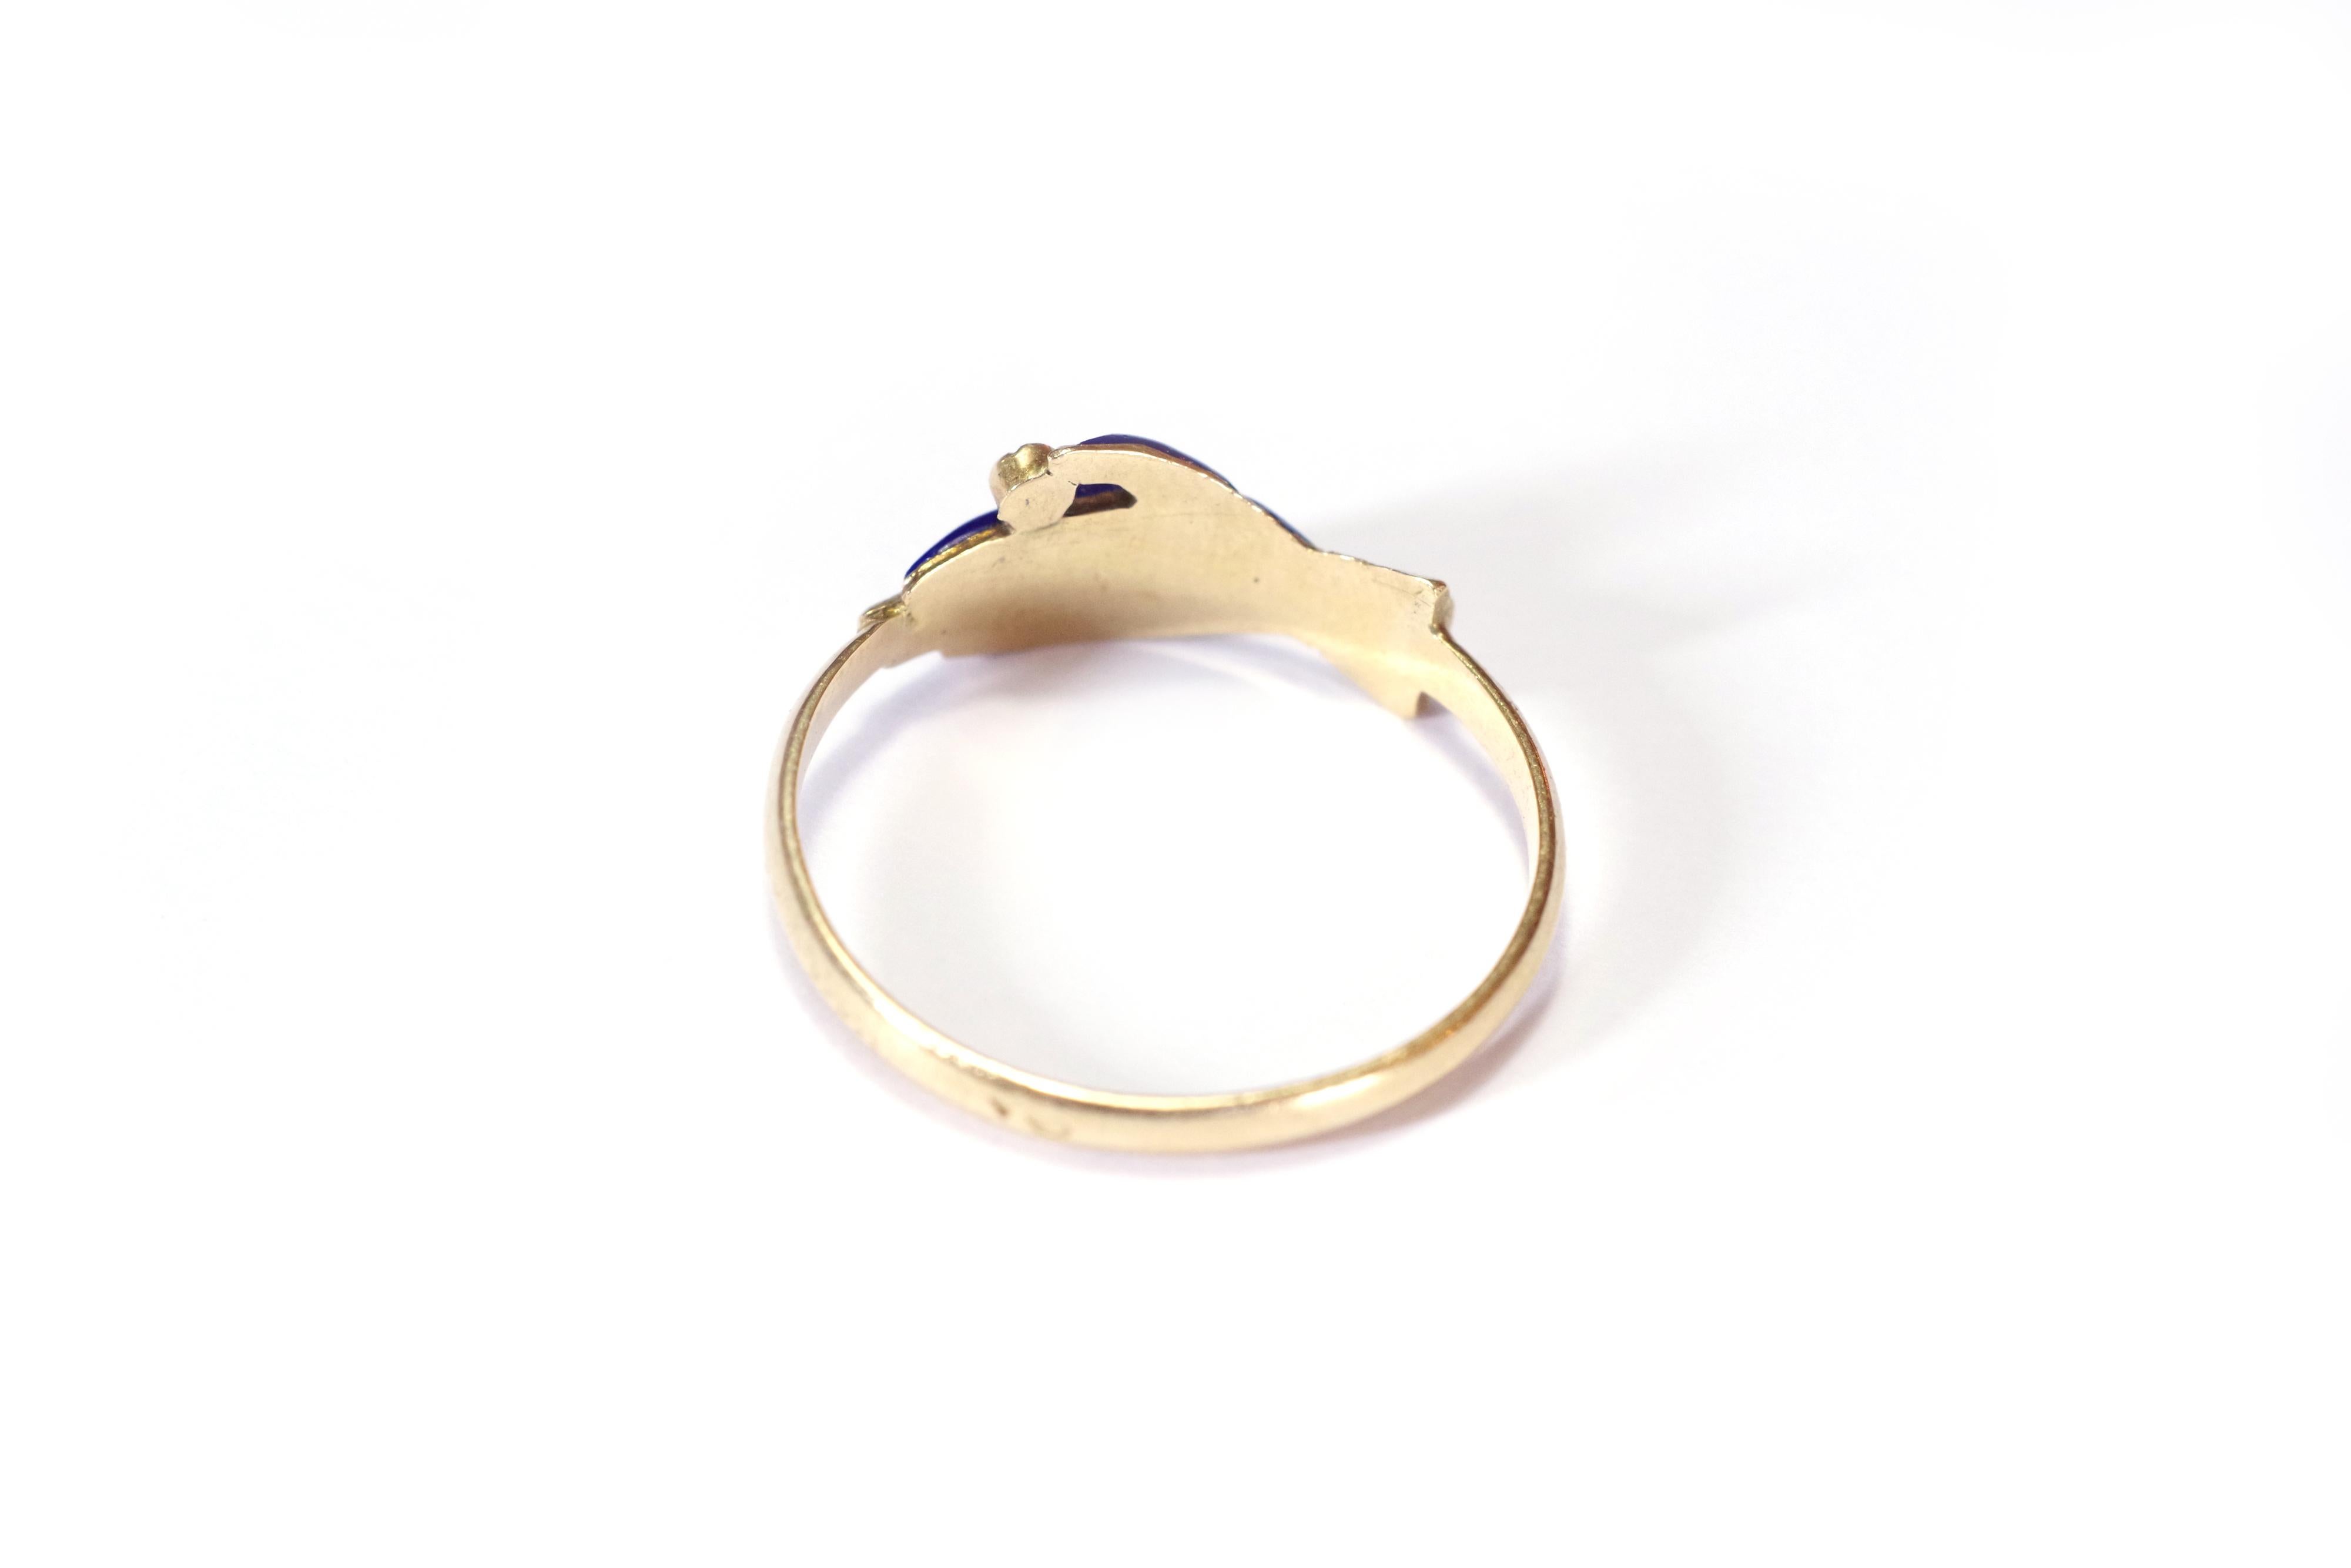 Late Victorian Victorian ring hand enamel diamond in yellow gold, fede ring